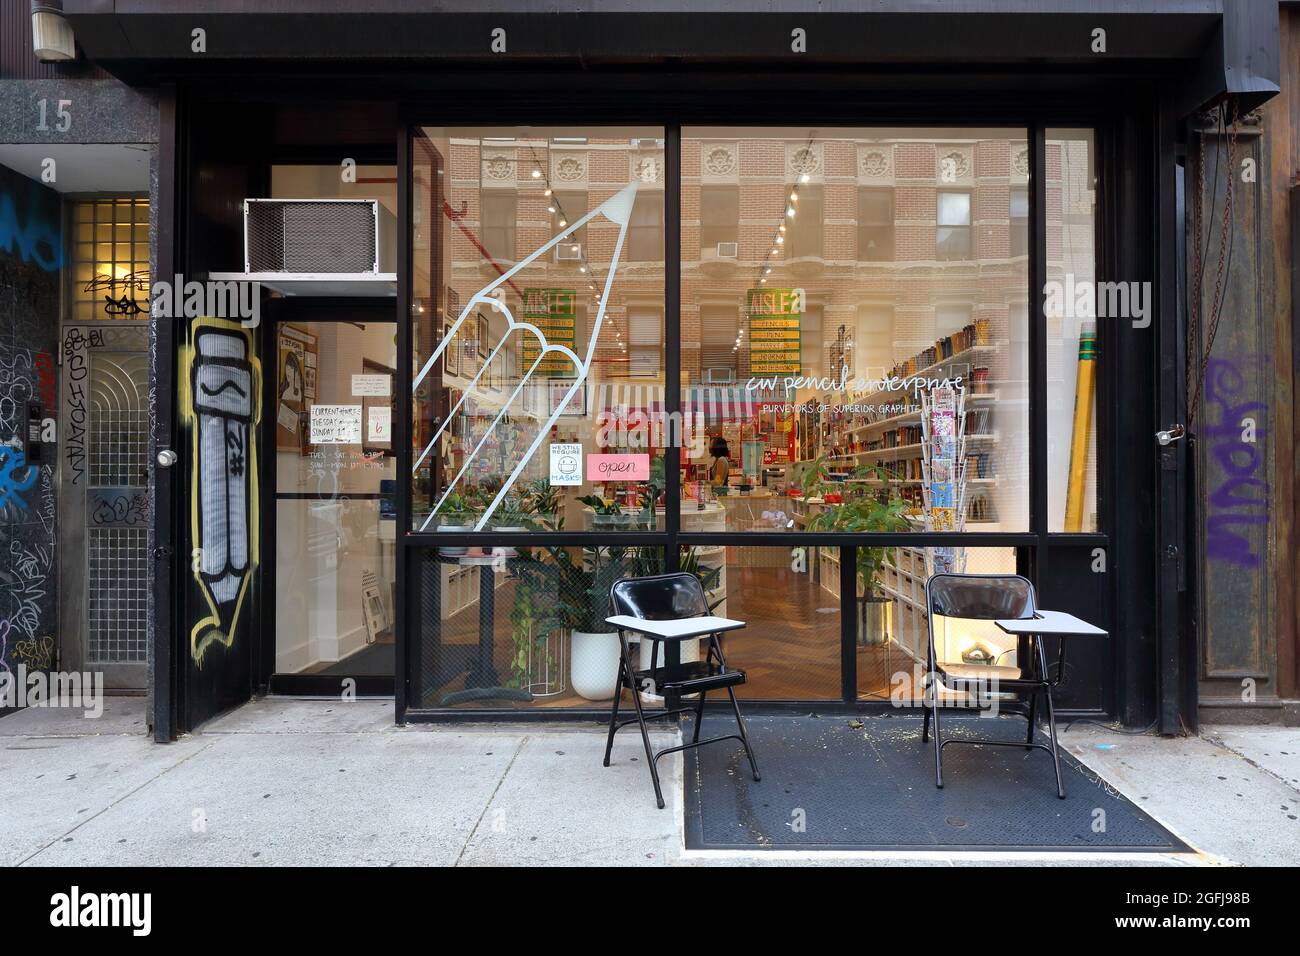 [historical storefront] CW Pencil Enterprise, 15 Orchard St, New York, NYC storefront photo of a pencil store and stationary shop in Lower East Side Stock Photo